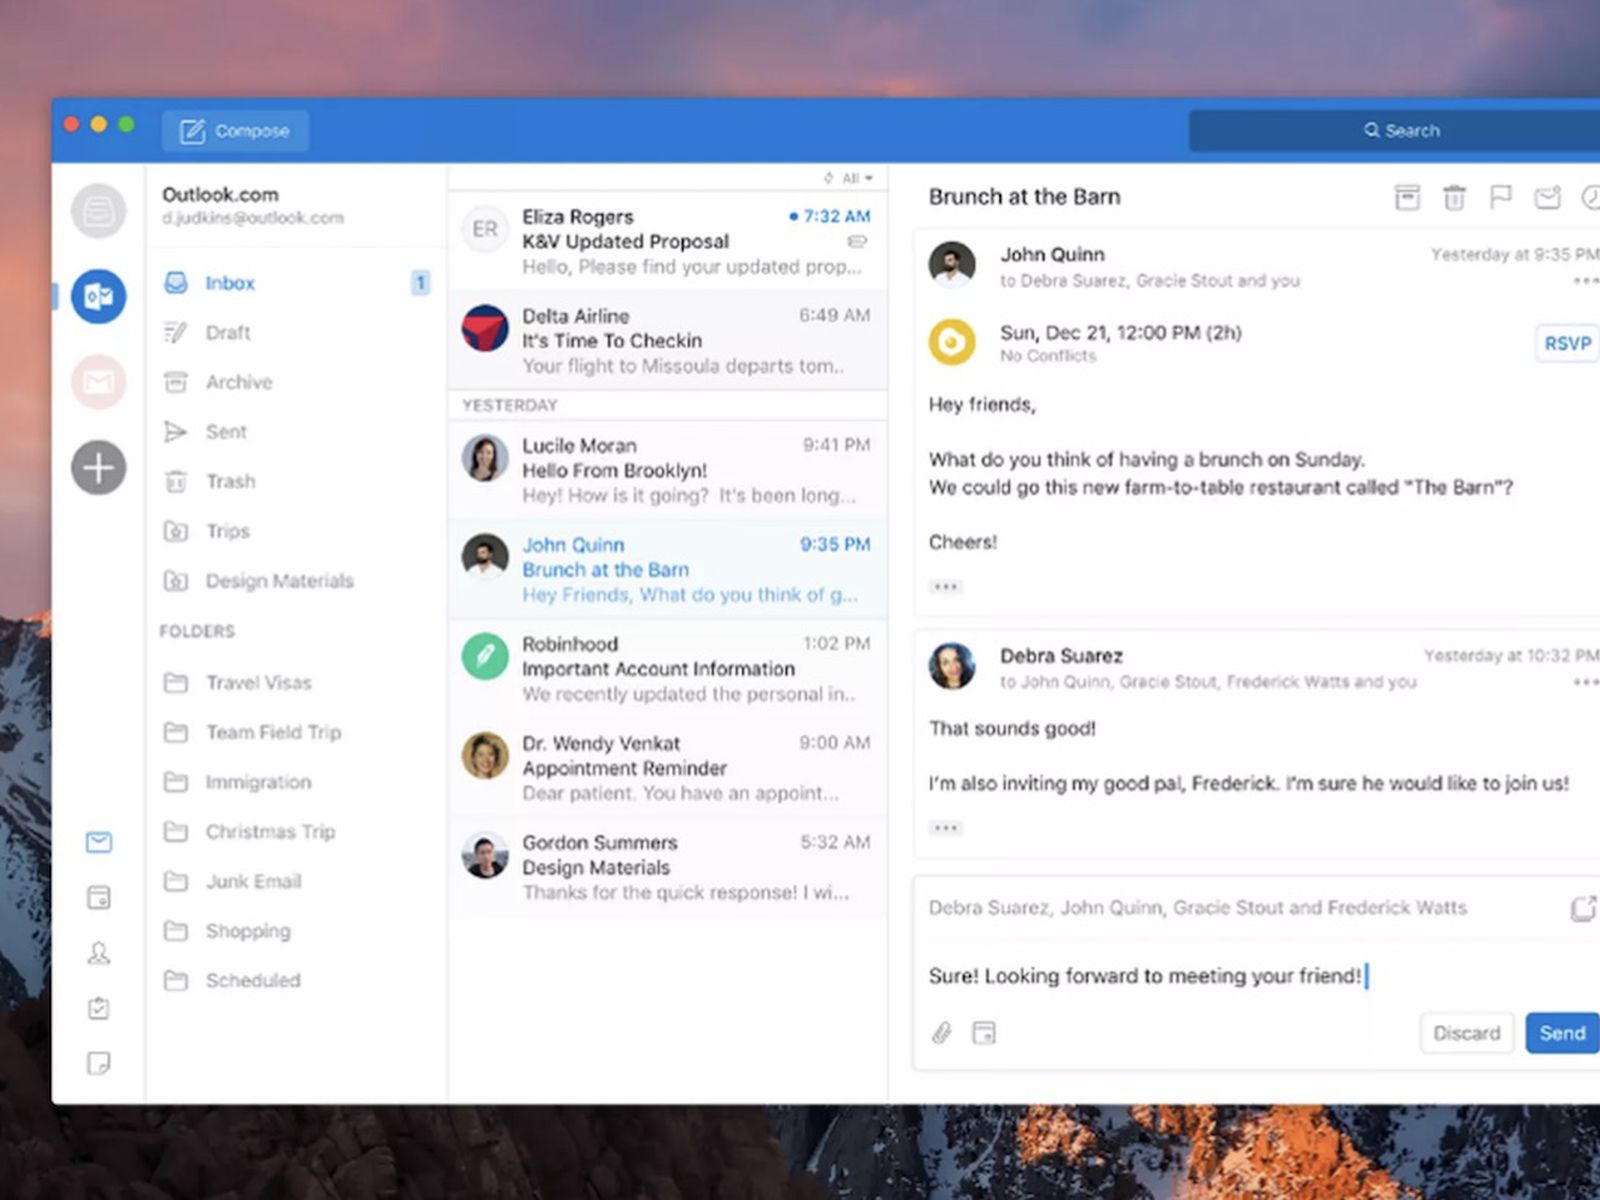 new outlook for mac